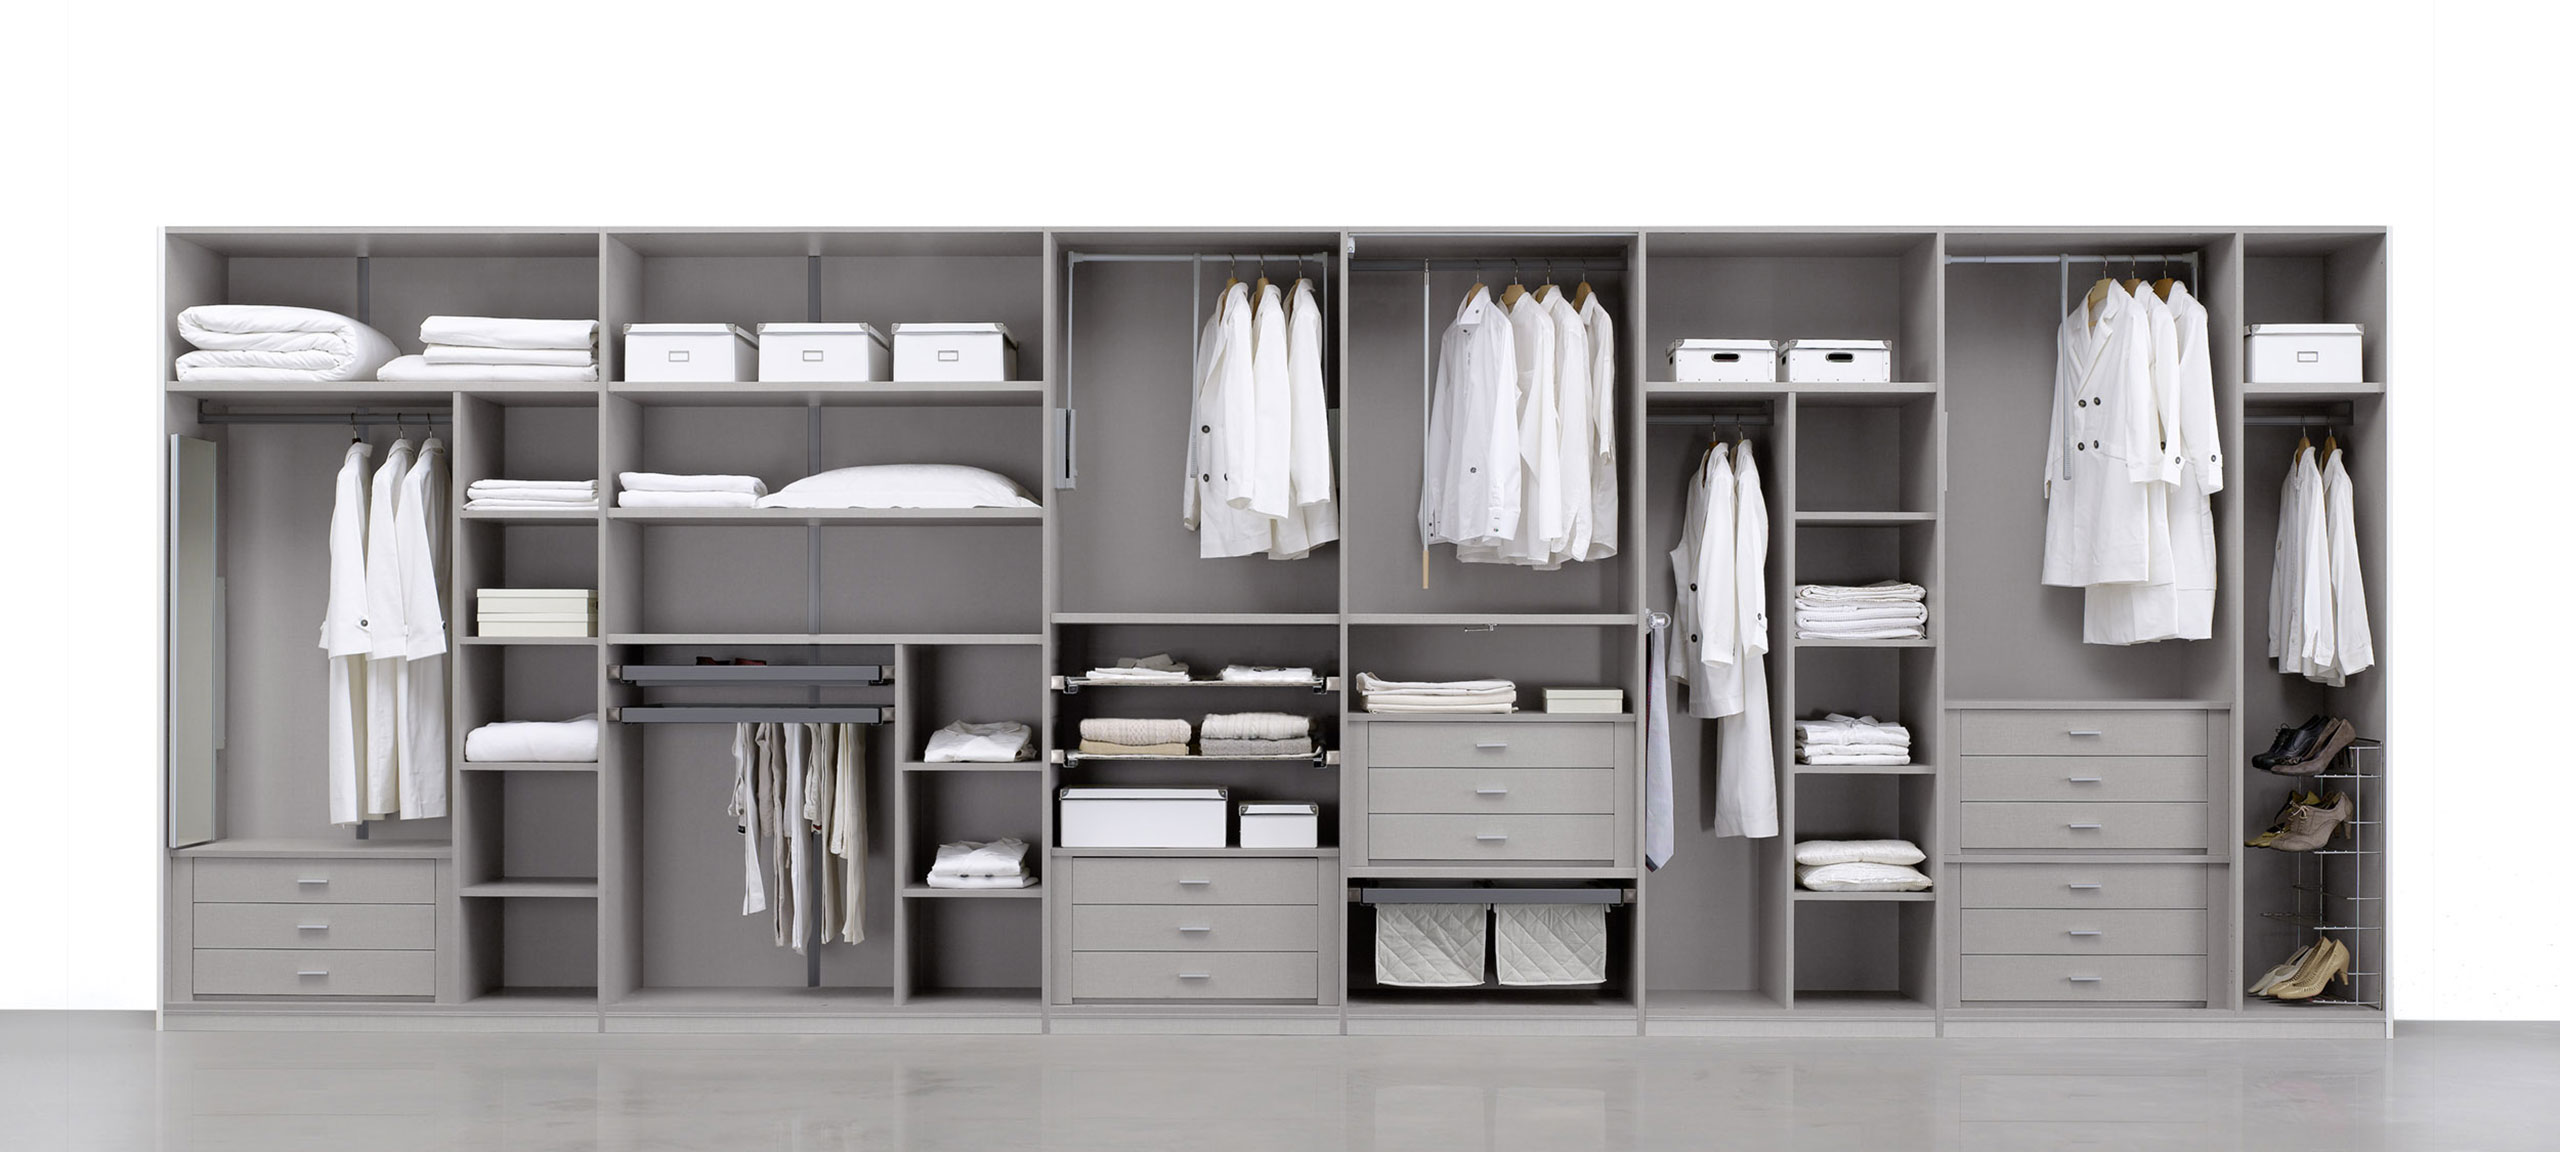 walk-in wardrobe for your contemporary-style bedroom 2